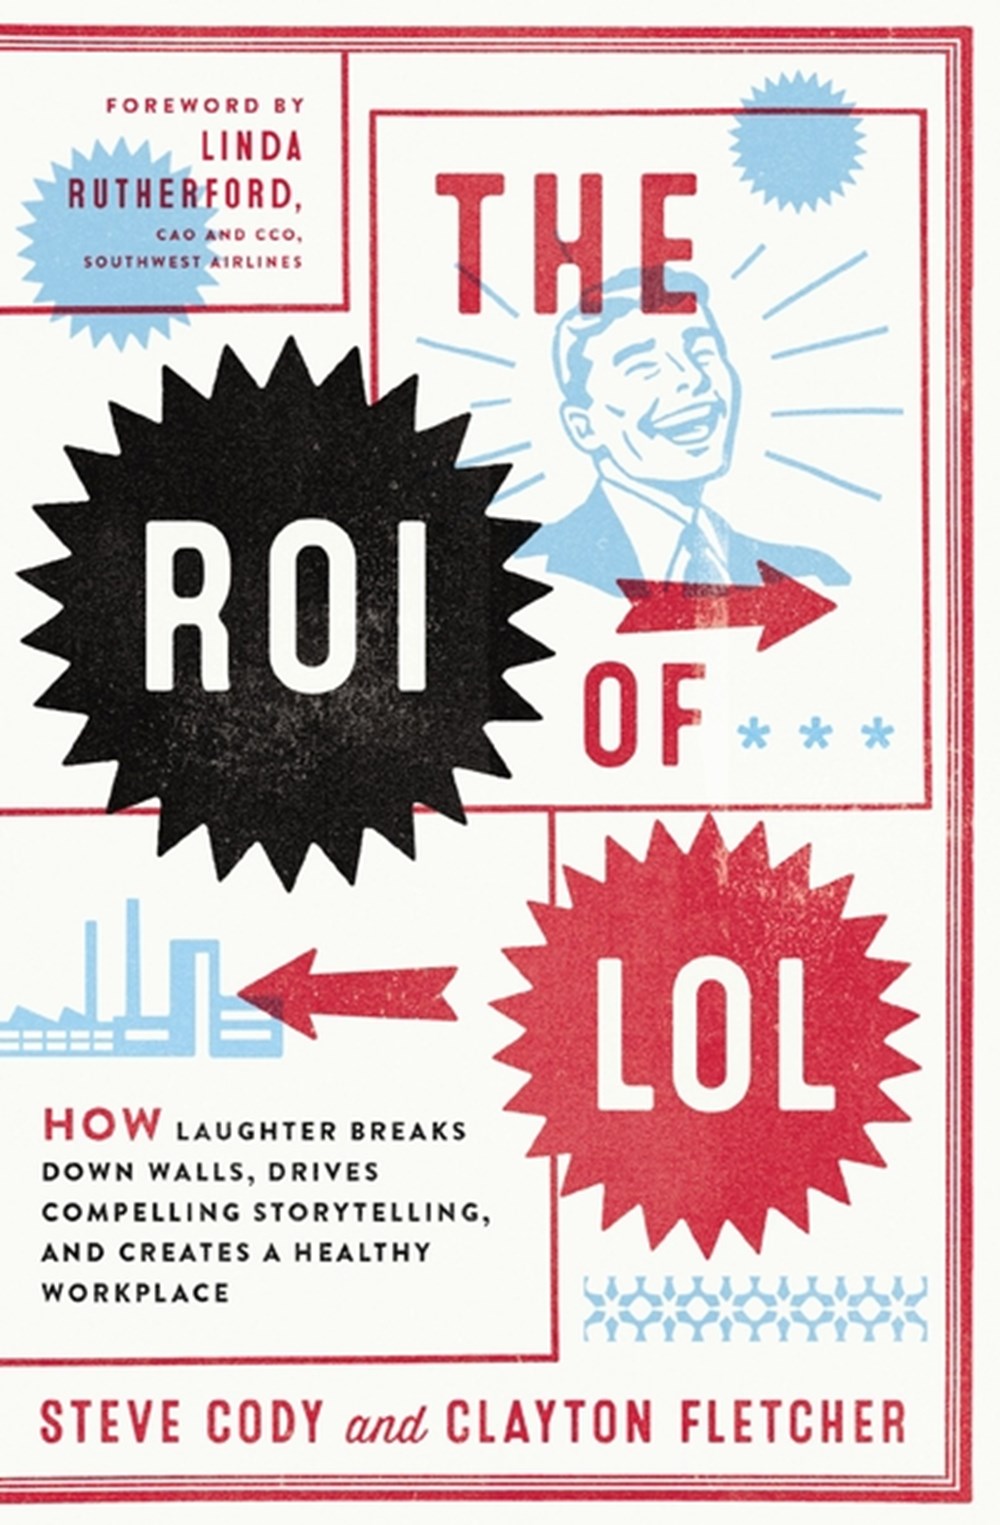 Roi of Lol How Laughter Breaks Down Walls, Drives Compelling Storytelling, and Creates a Healthy Wor